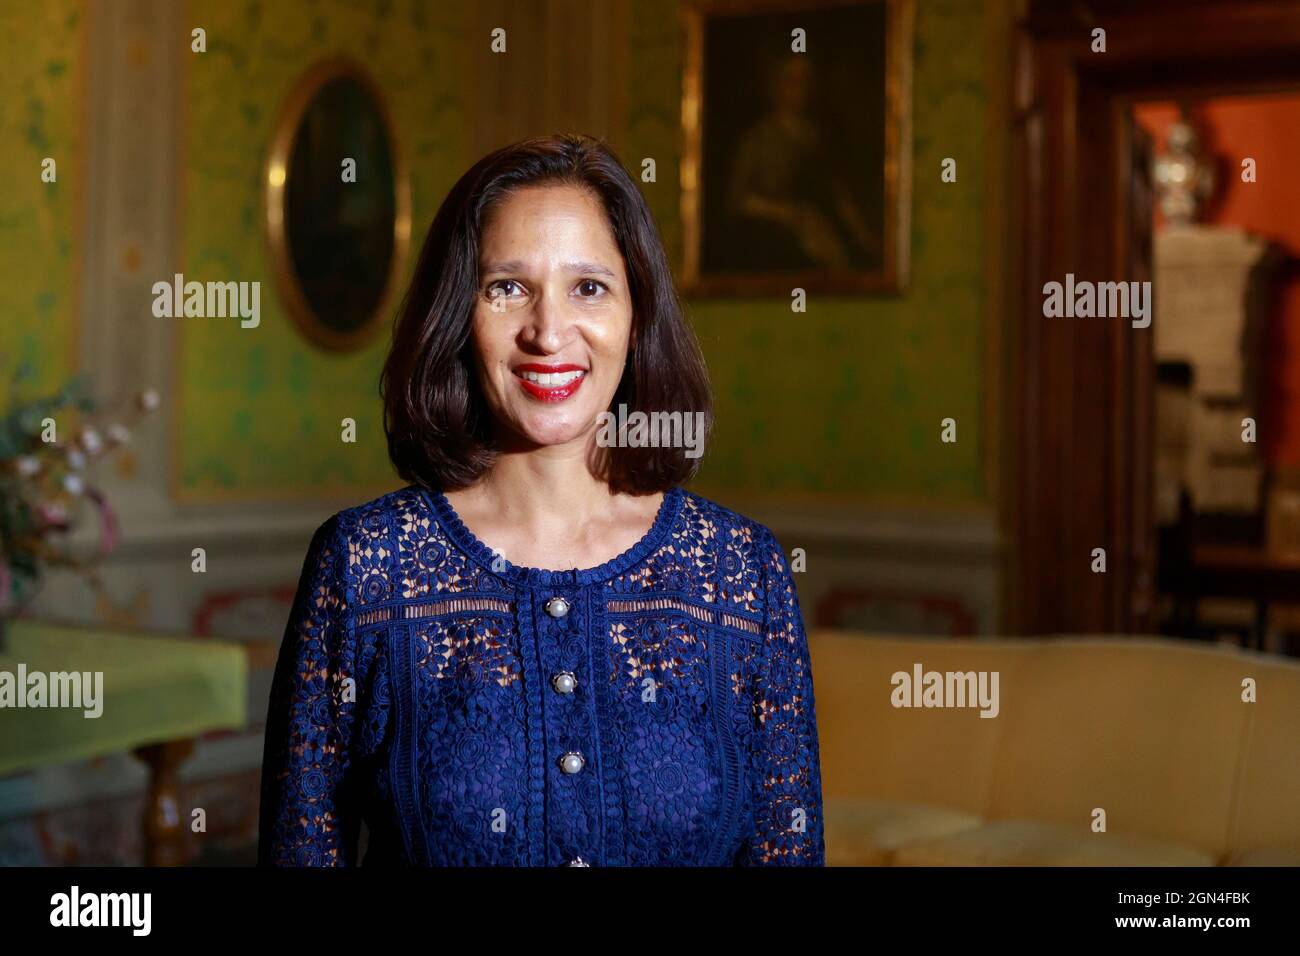 Portrait of US Honorary Consul Ragini Gupta during an event in Bologna, Italy Stock Photo